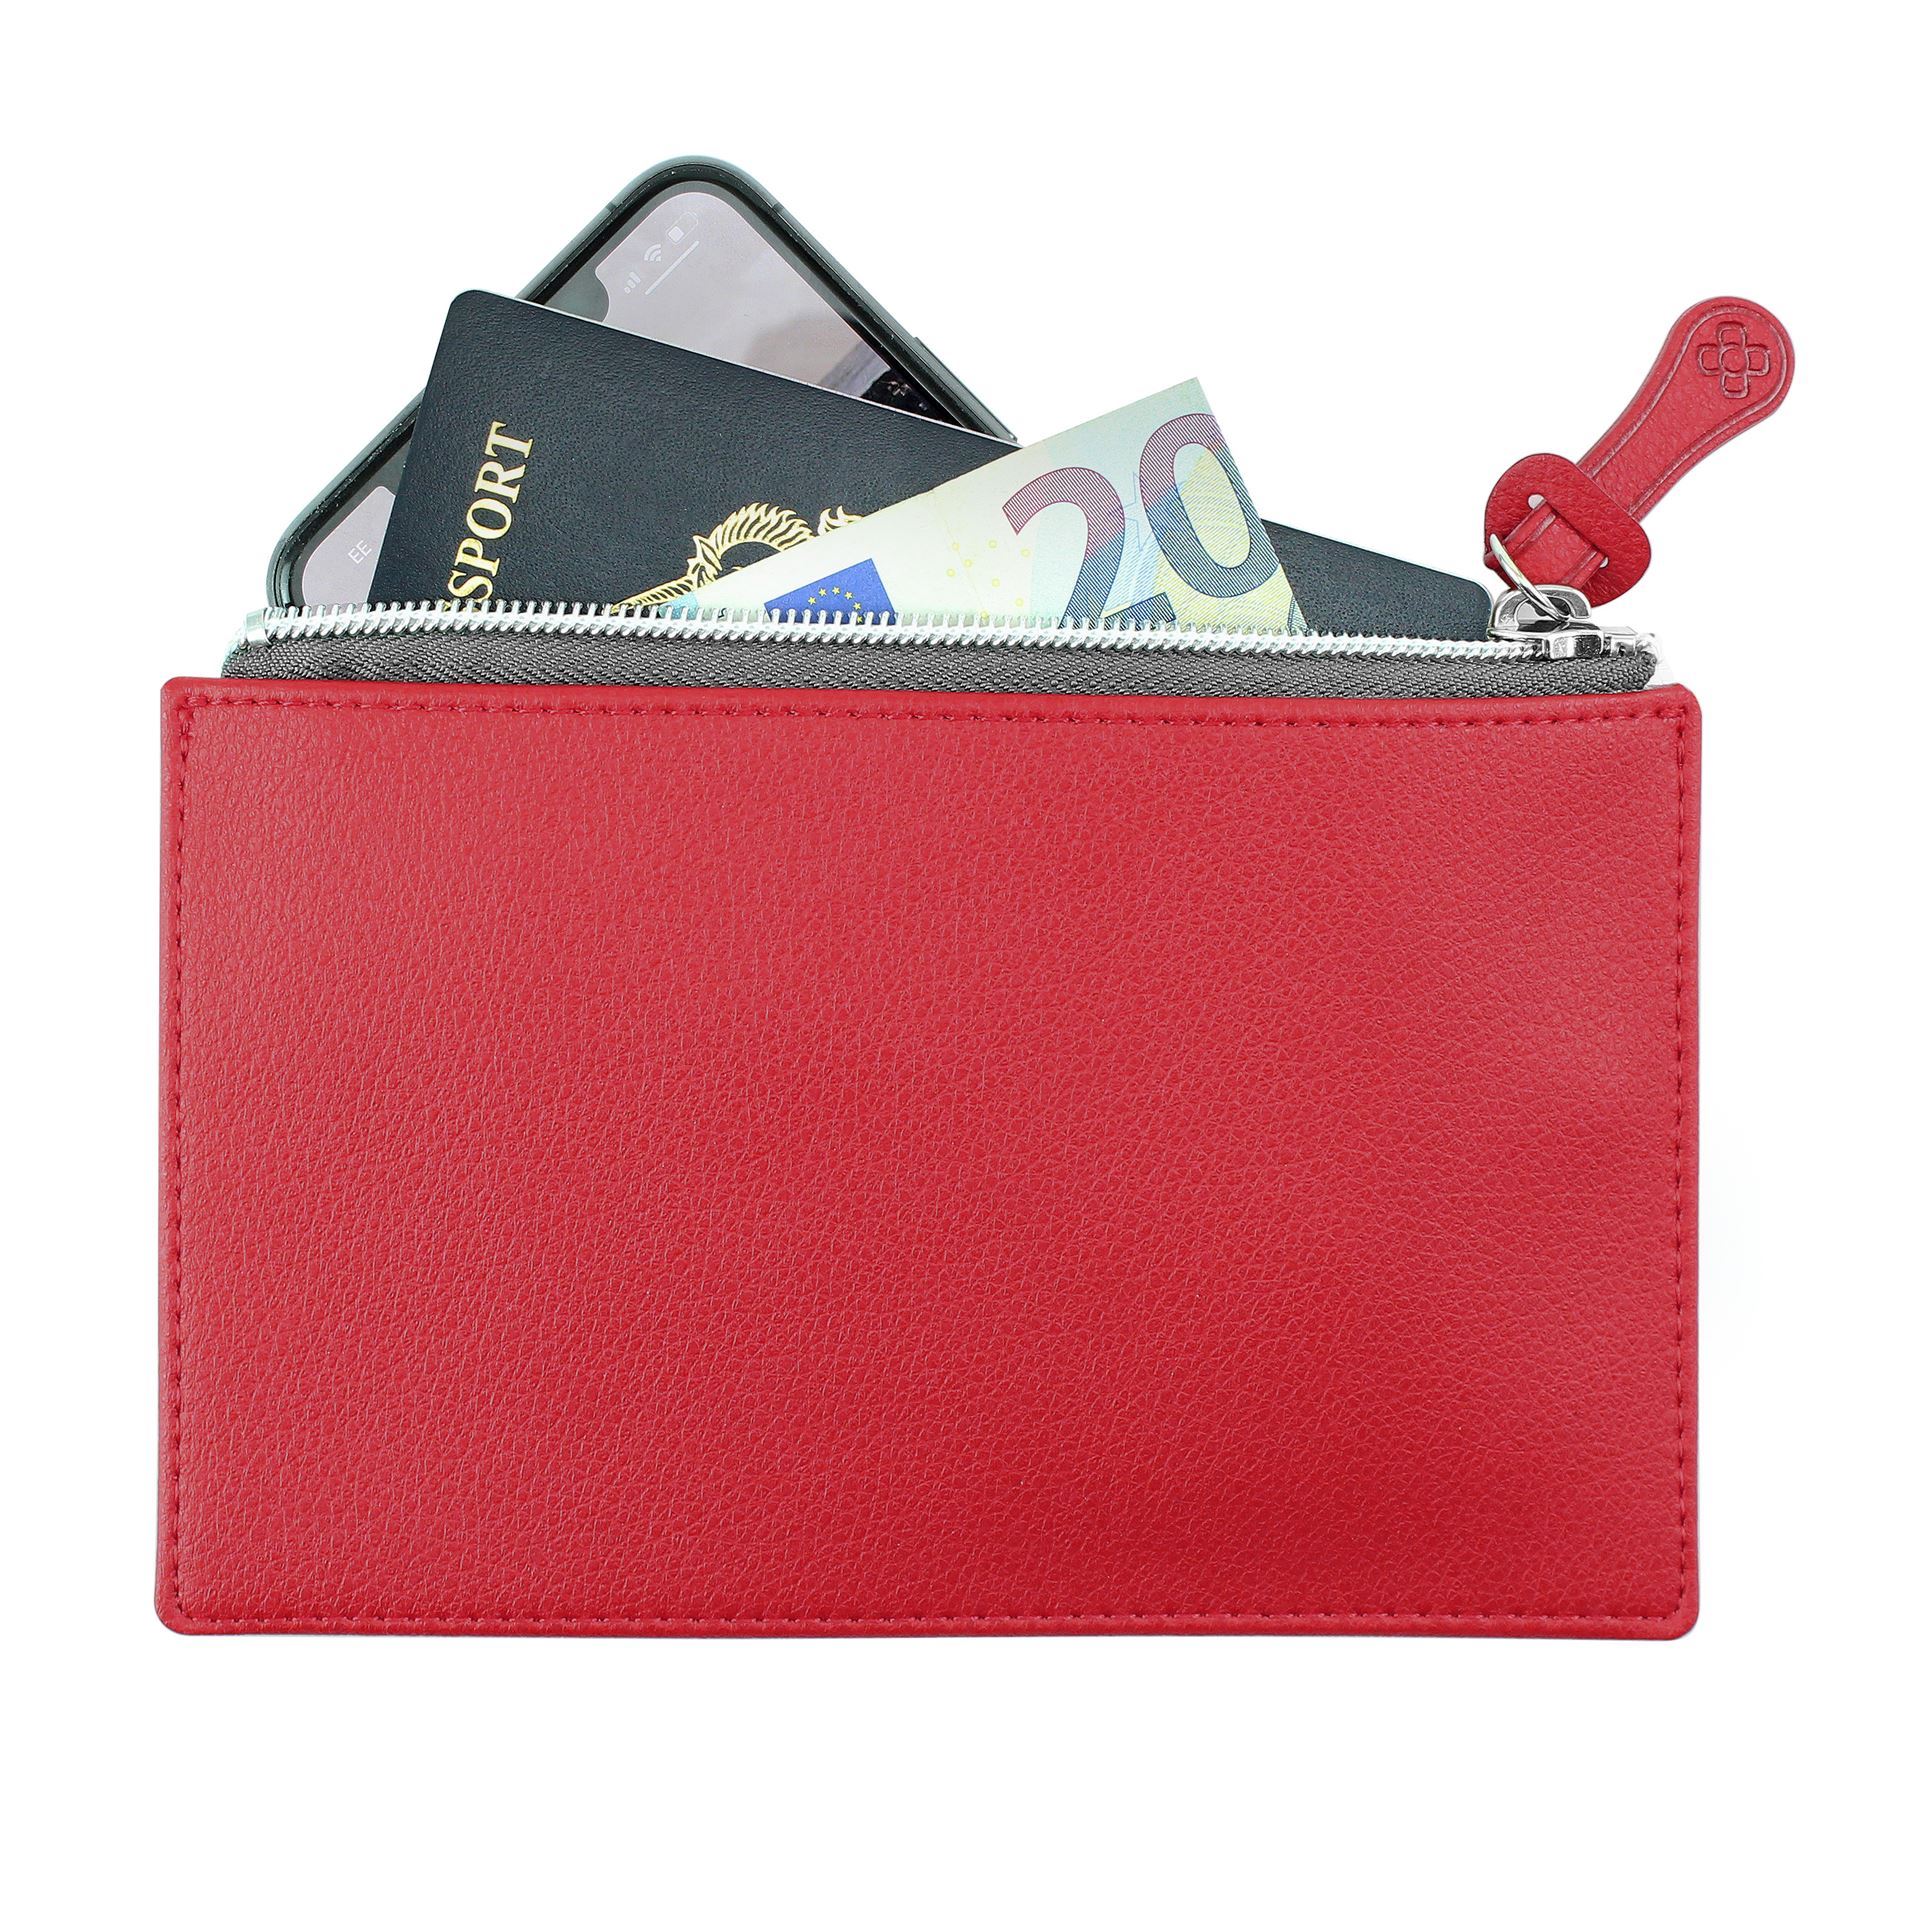 Small Zipped Pouch in recycled Como, a quality vegan PU.